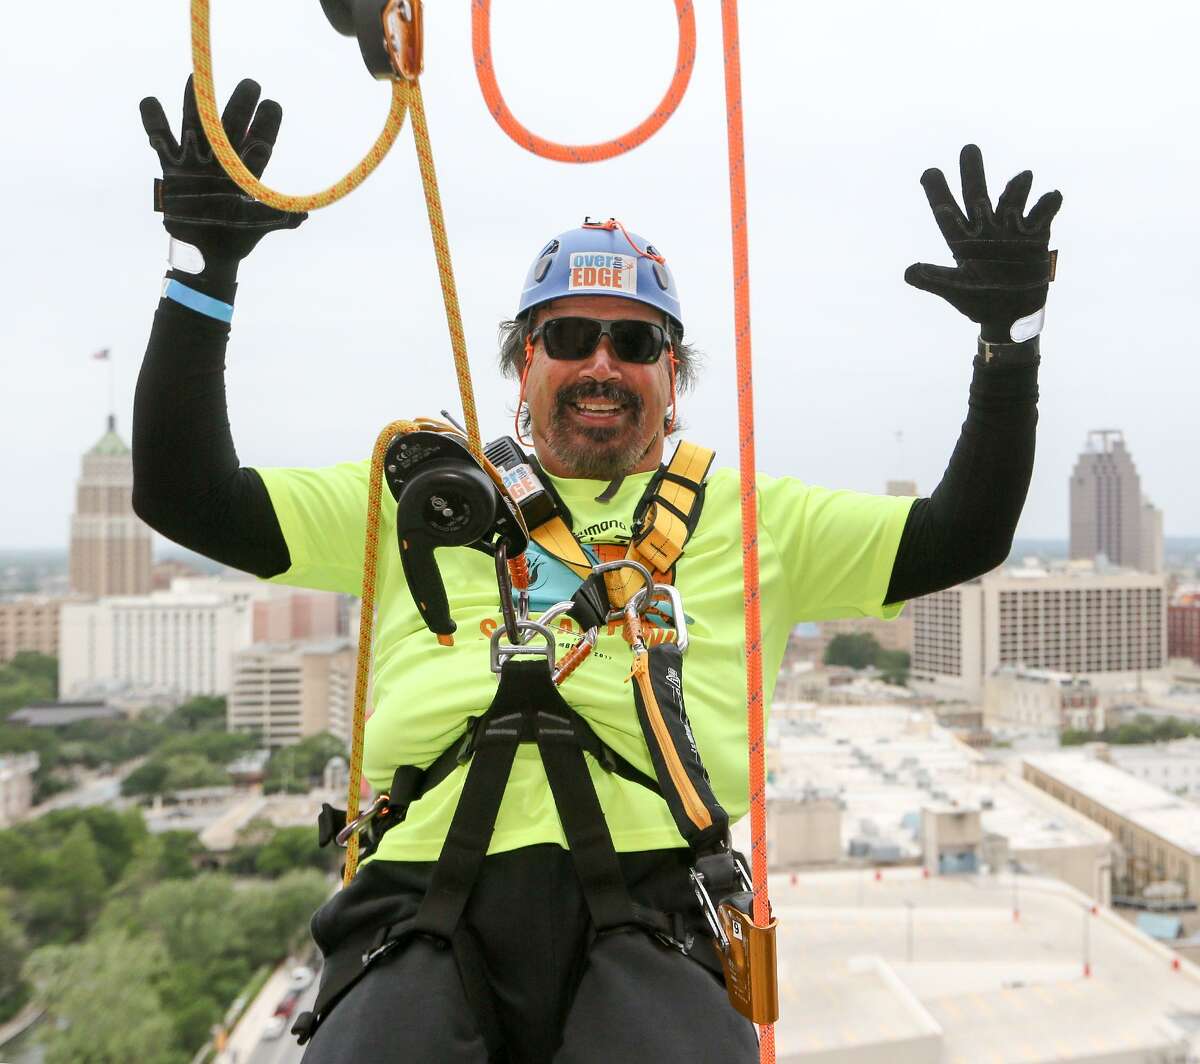 Rick Castillo goes "hands free" before rappelling from the 19th floor of the Marriott Rivercenter, 100 Bowie St. in Boysville's "Over the Edge" fundraising event on Saturday, April 7, 2018. MARVIN PFEIFFER/mpfeiffer@express-news.net